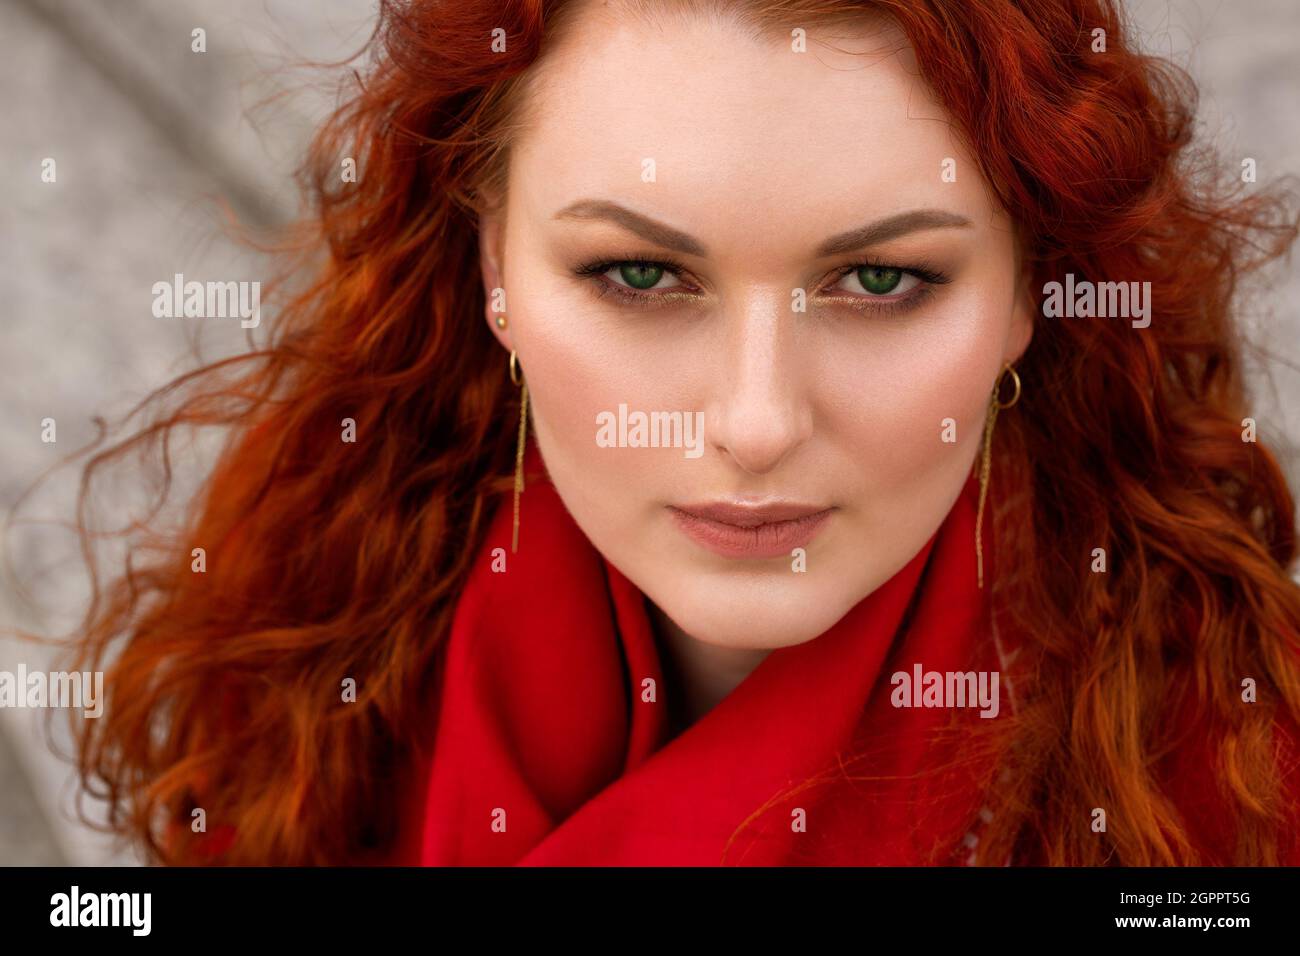 Portrait Of Woman With Red Hair And Bright Makeup. Beautiful Green Eyes. Red  Scarf Around The Neck Stock Photo - Alamy